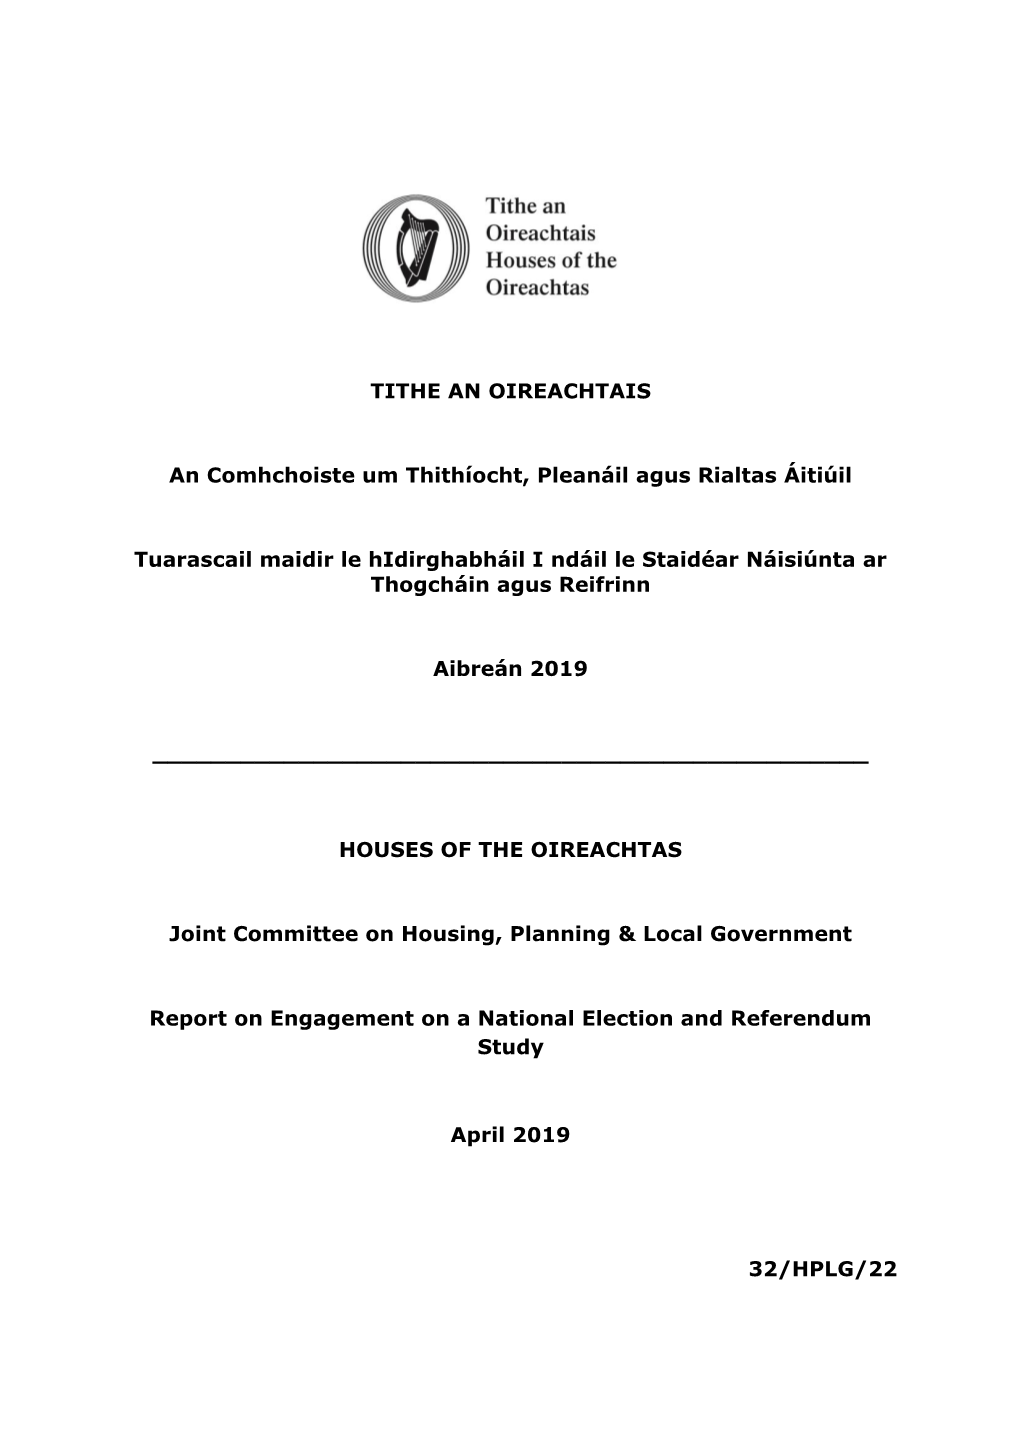 Report on Engagement on a National Election and Referendum Study